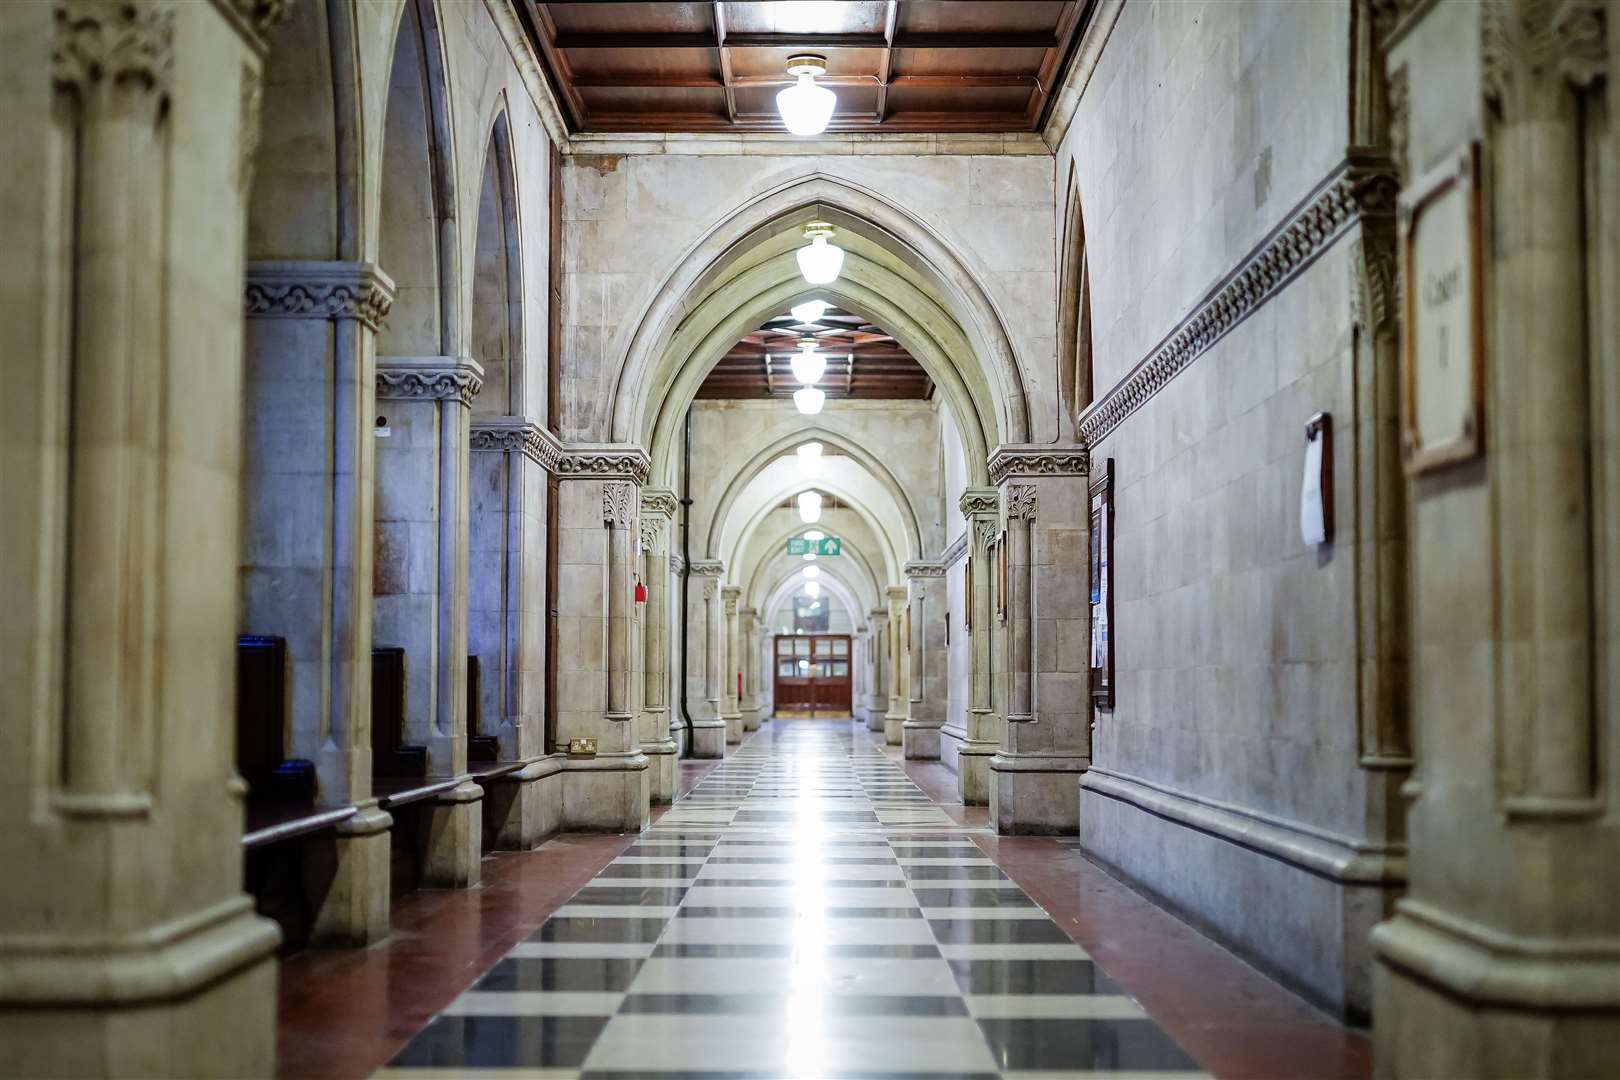 A hallway at the Royal Courts of Justice in central London, where hearings have been staged (PA)